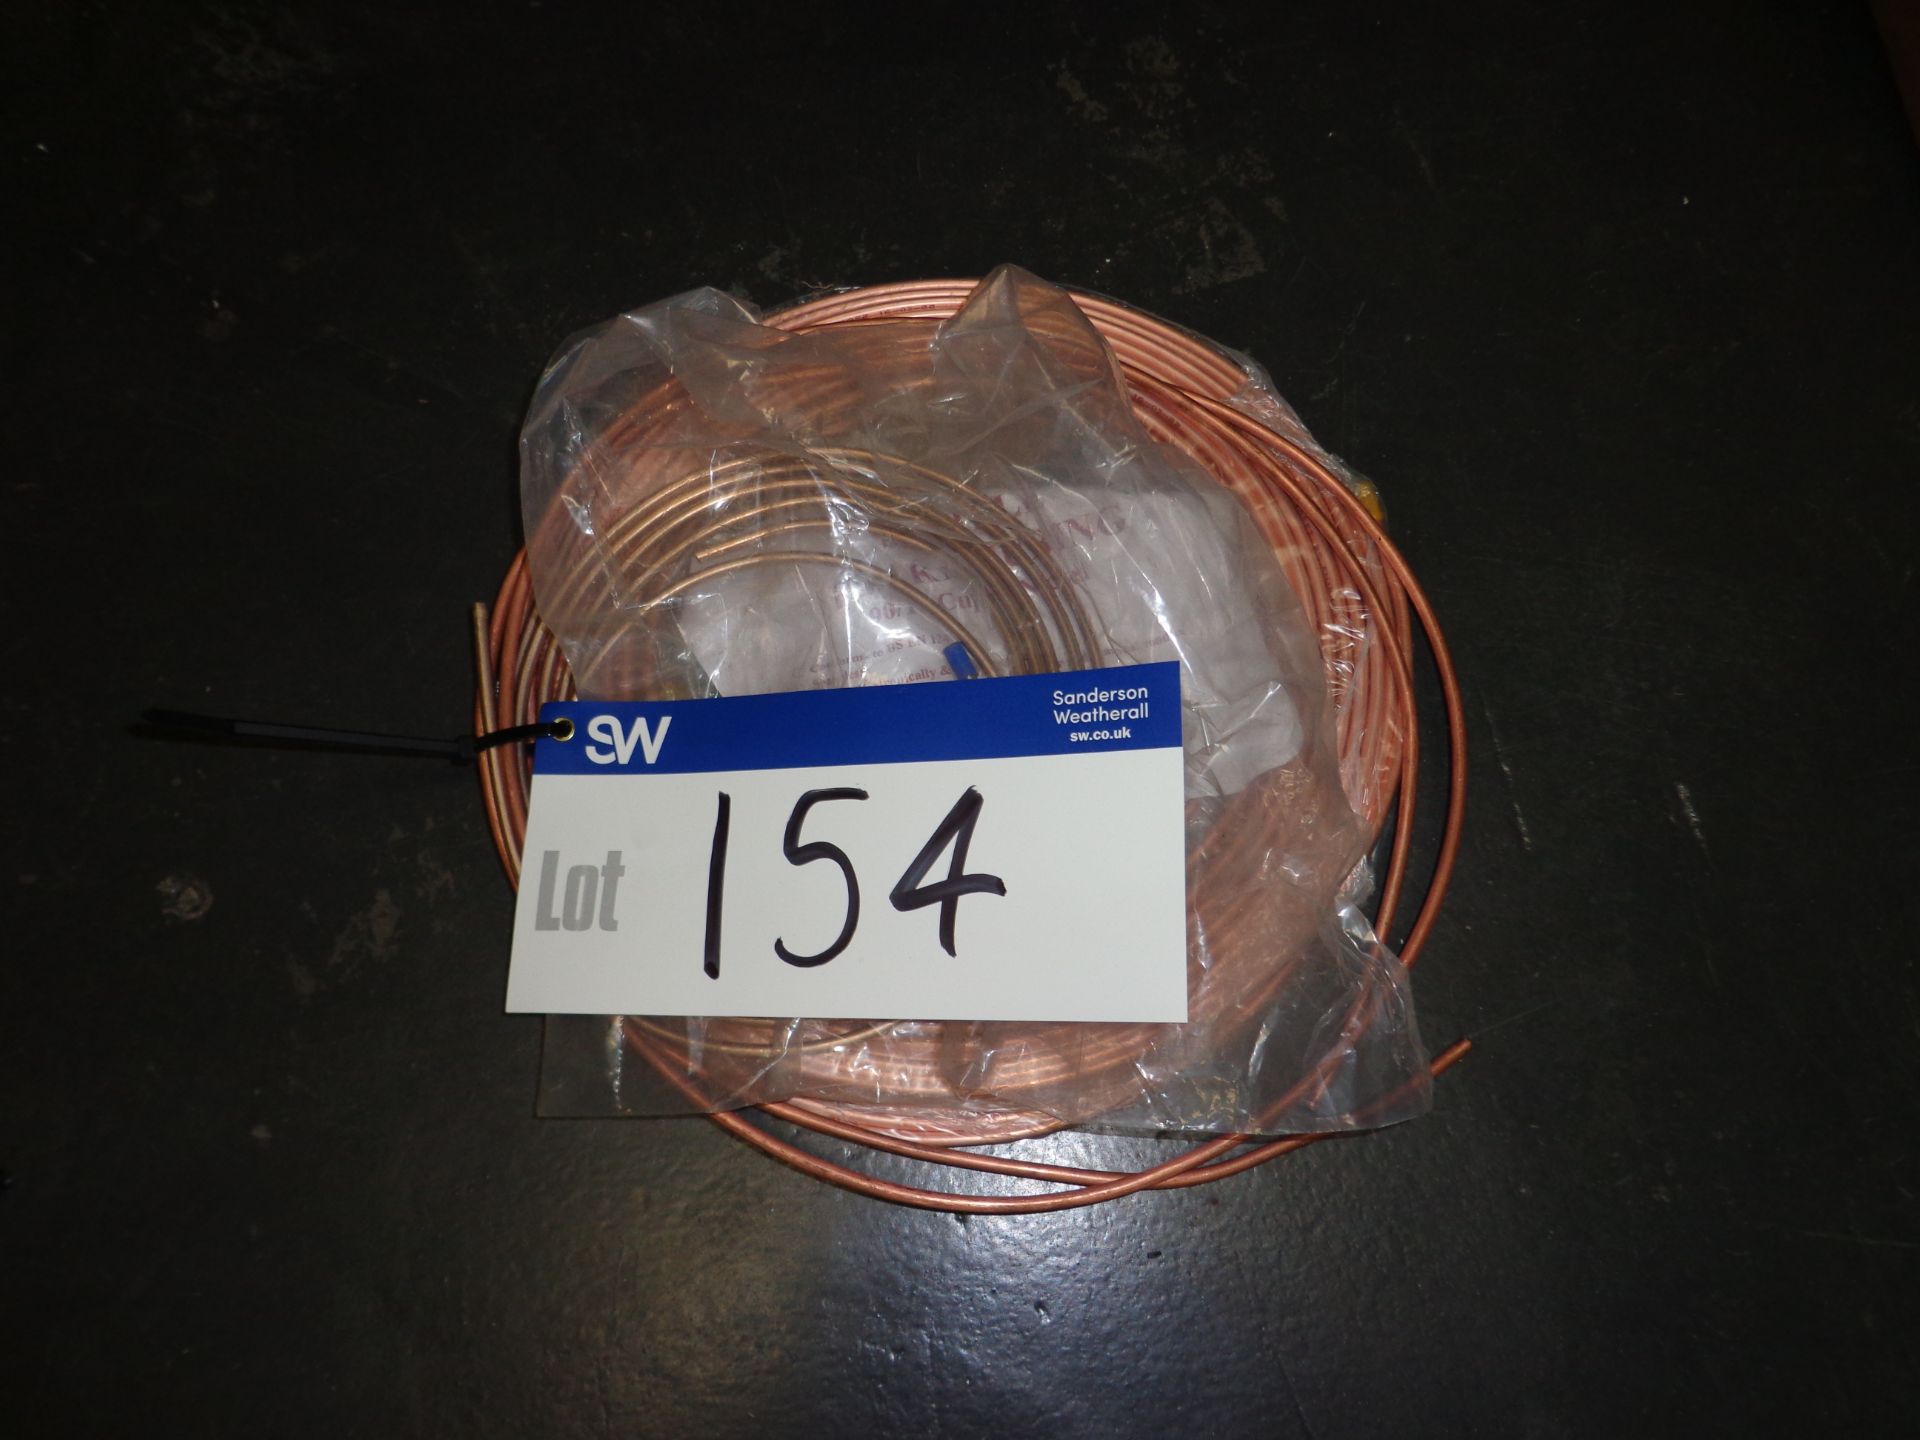 Copper Brake Tube as lottedPlease read the following important notes:- ***Overseas buyers - All lots